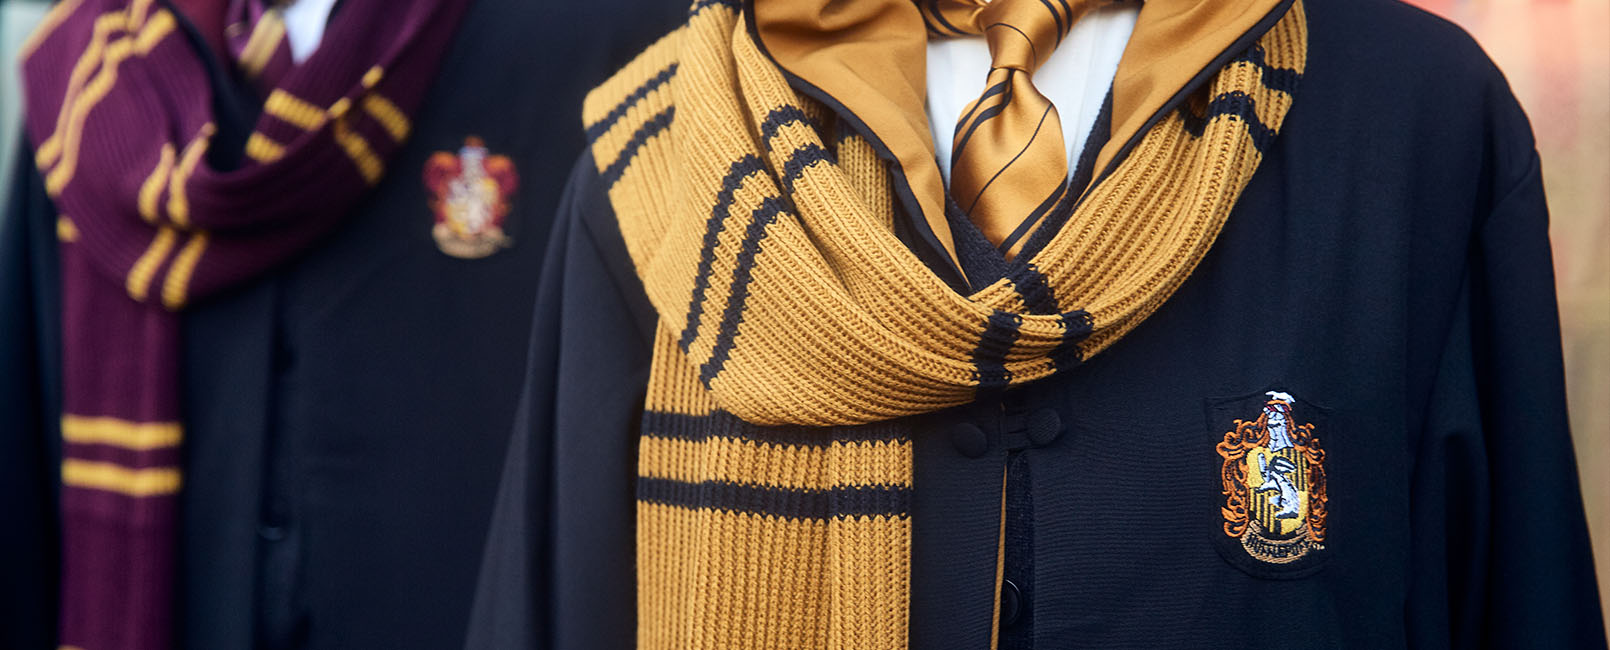 Gryffindor™ Robe with Authentic Scarf and Tie, Hufflepuff™ Robe with Authentic Scarf and Tie